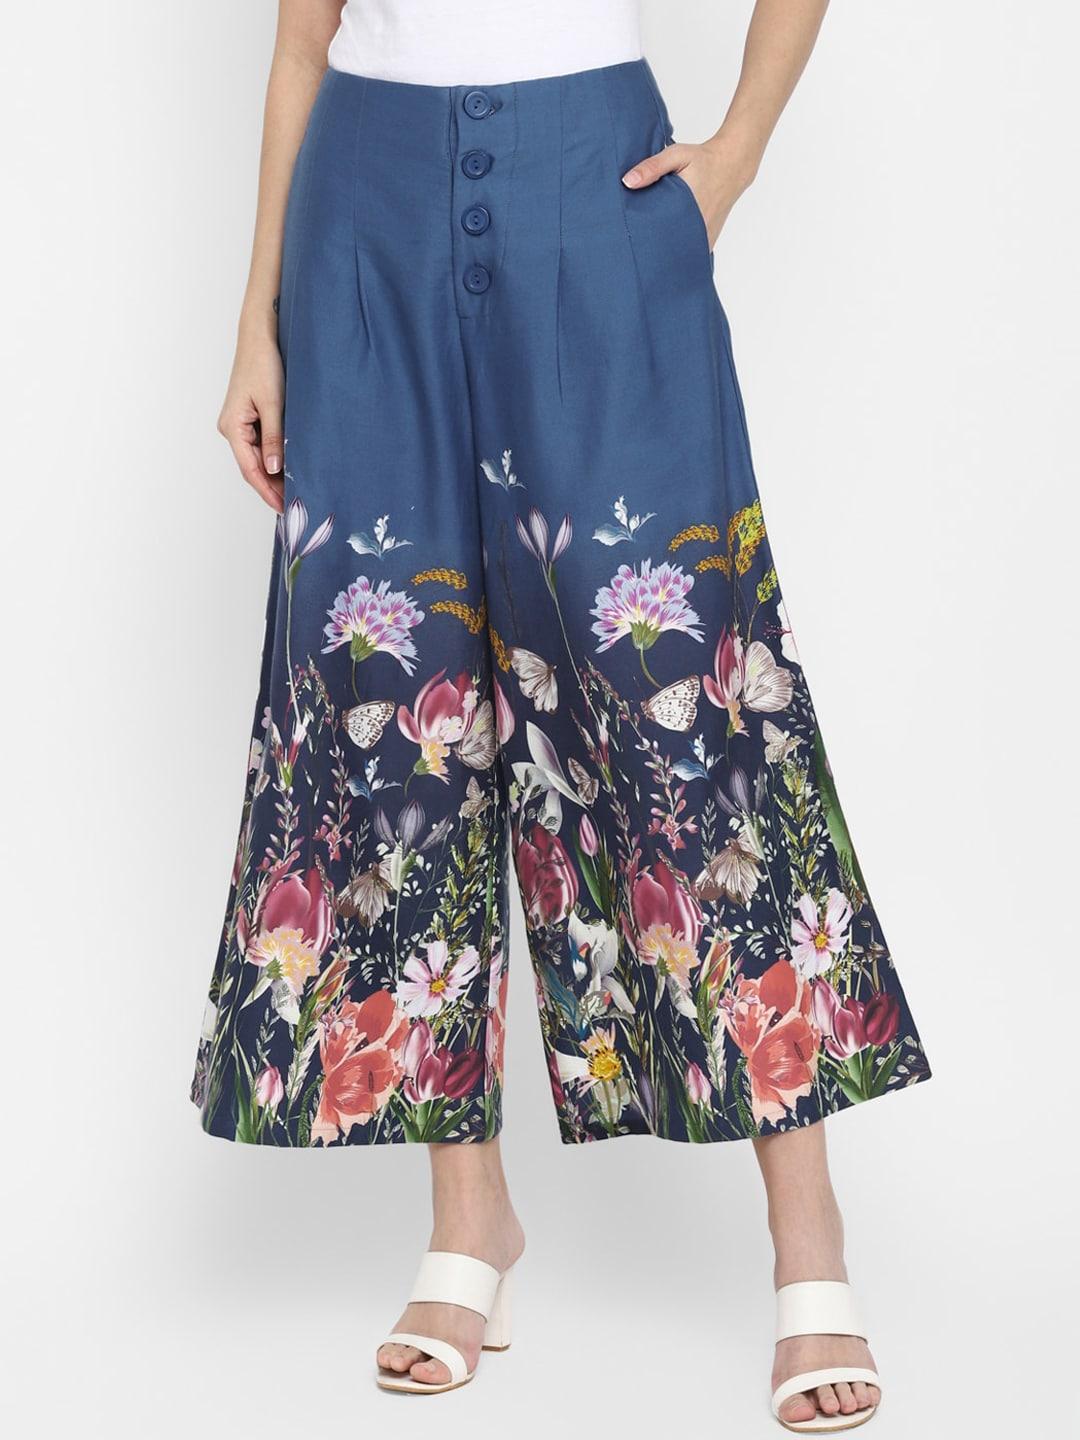 blanc9 women navy blue floral printed loose fit culottes trousers